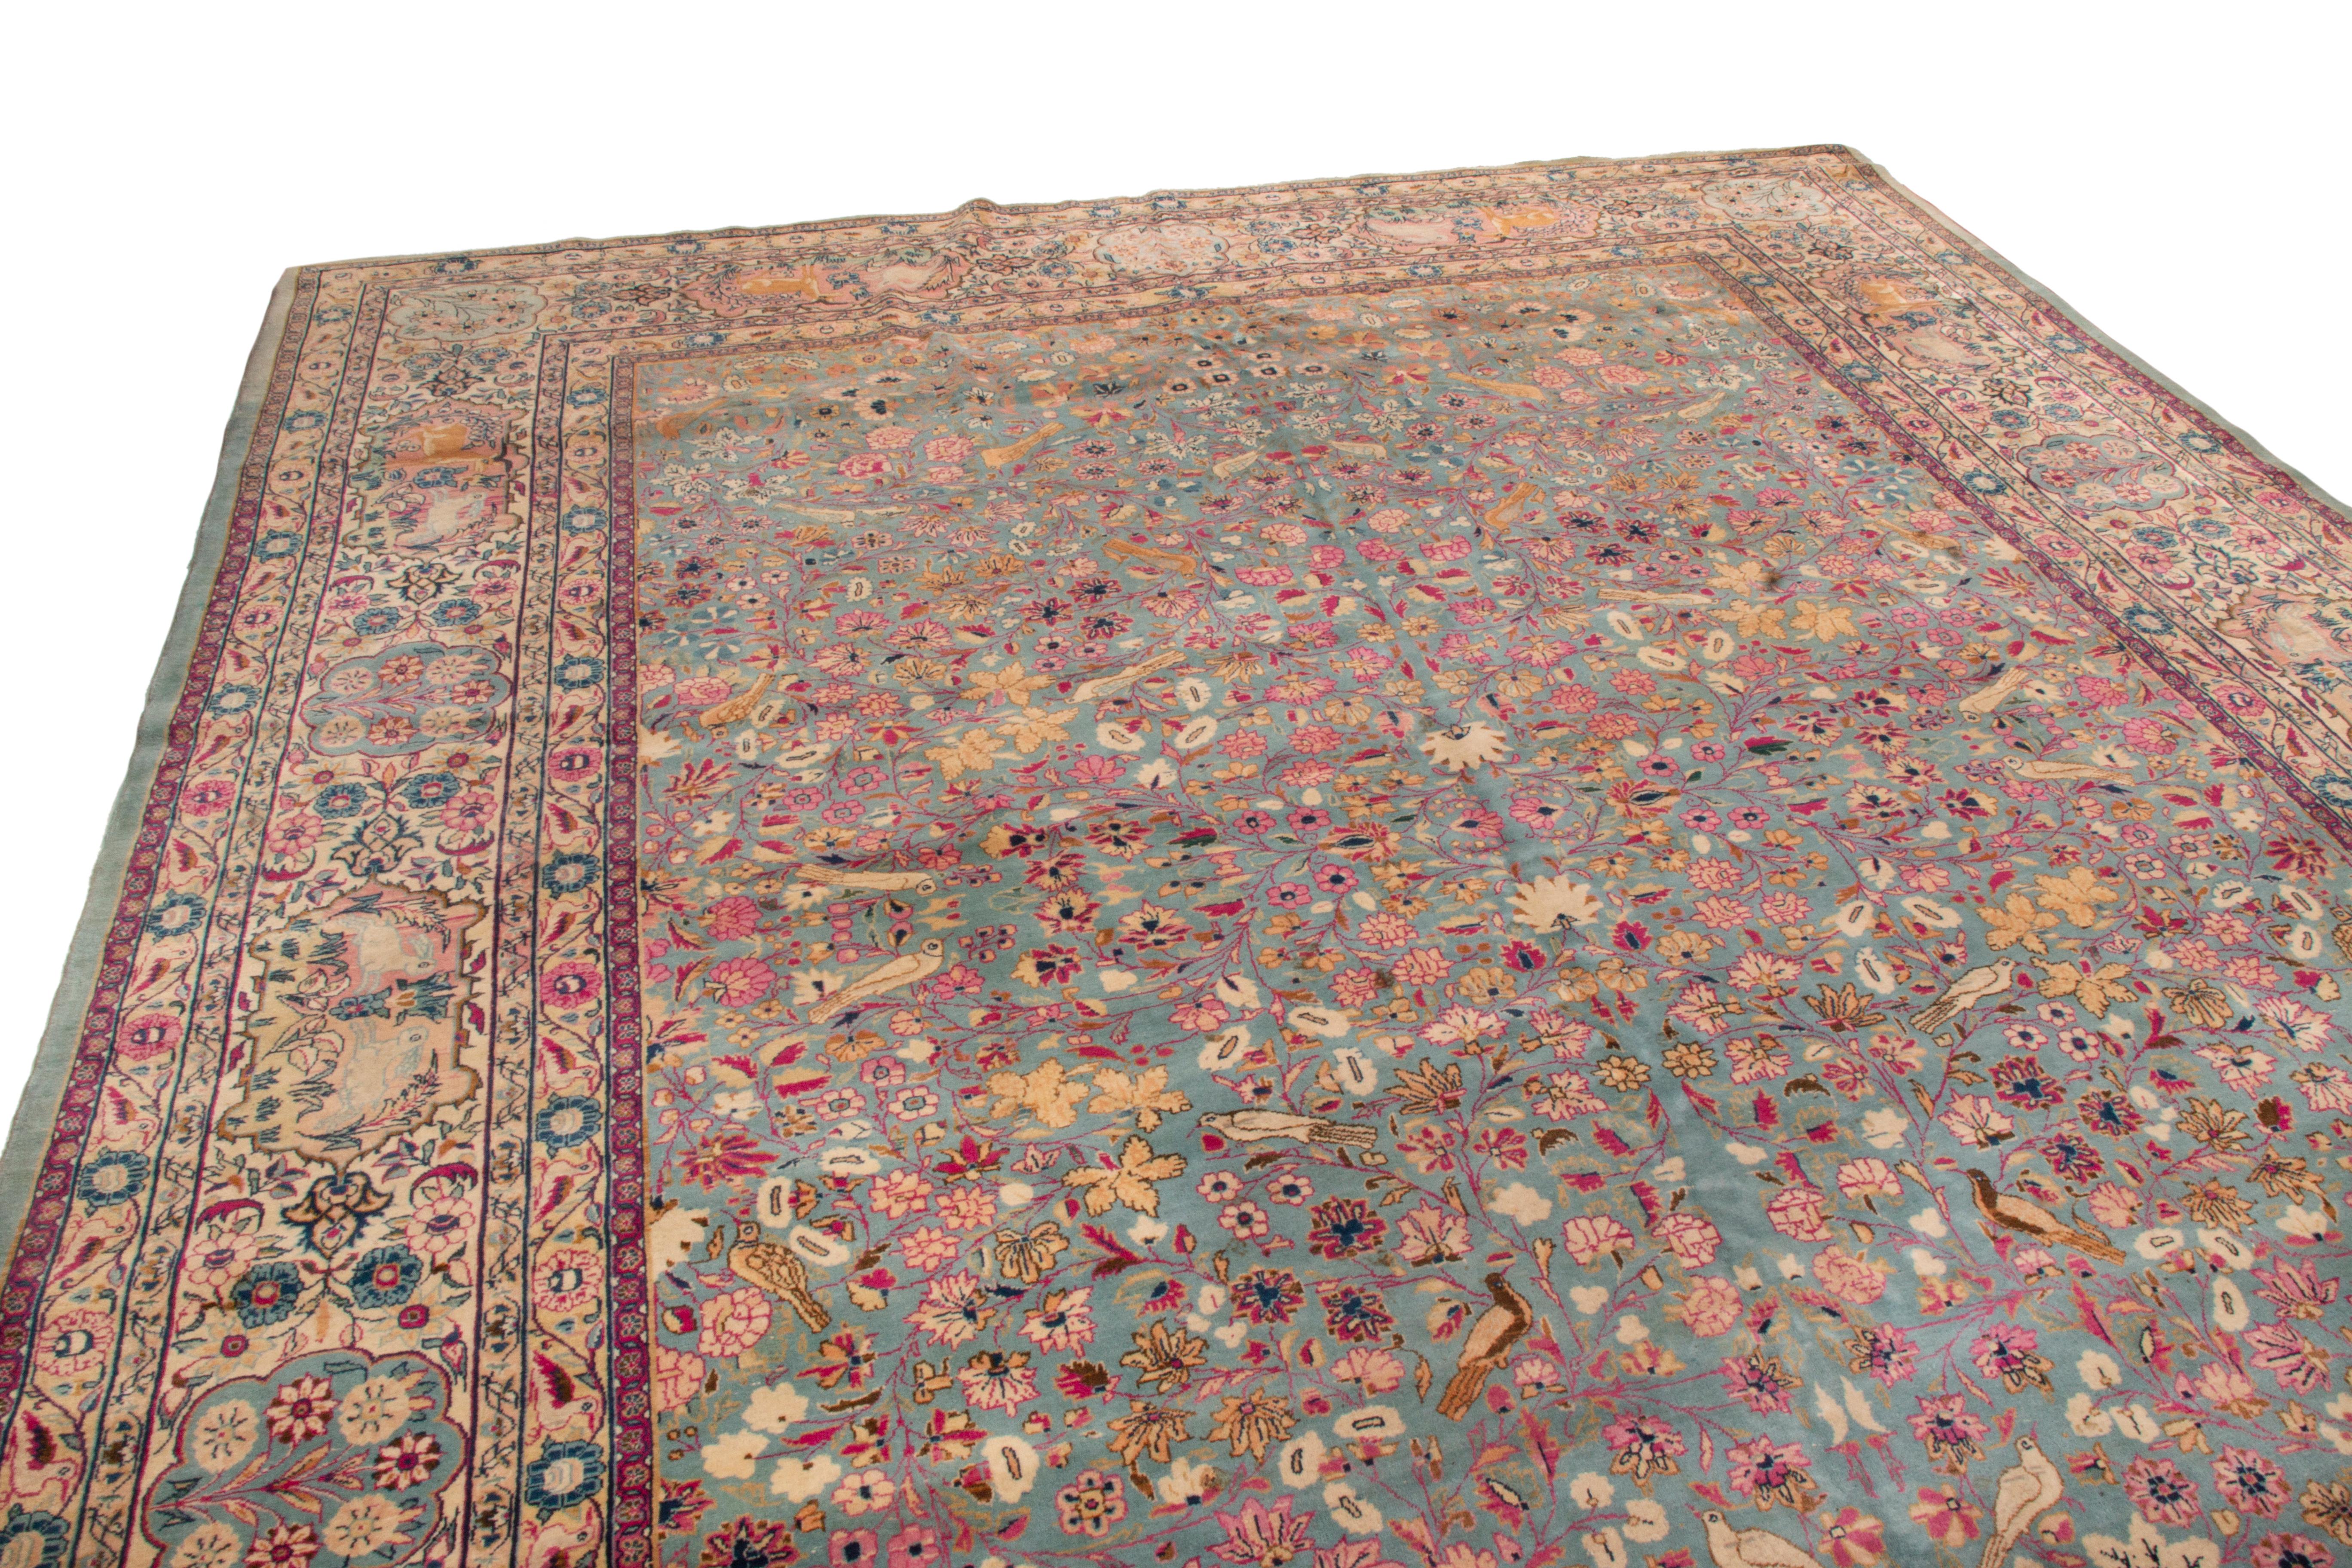 This antique Kashan wool rug is a signature piece from the Dabir family, one of the most widely regarded Kashan signature families. From 1910, the traditional all-over floral design is moderately uncommon, whereas many Kashan pieces of the era